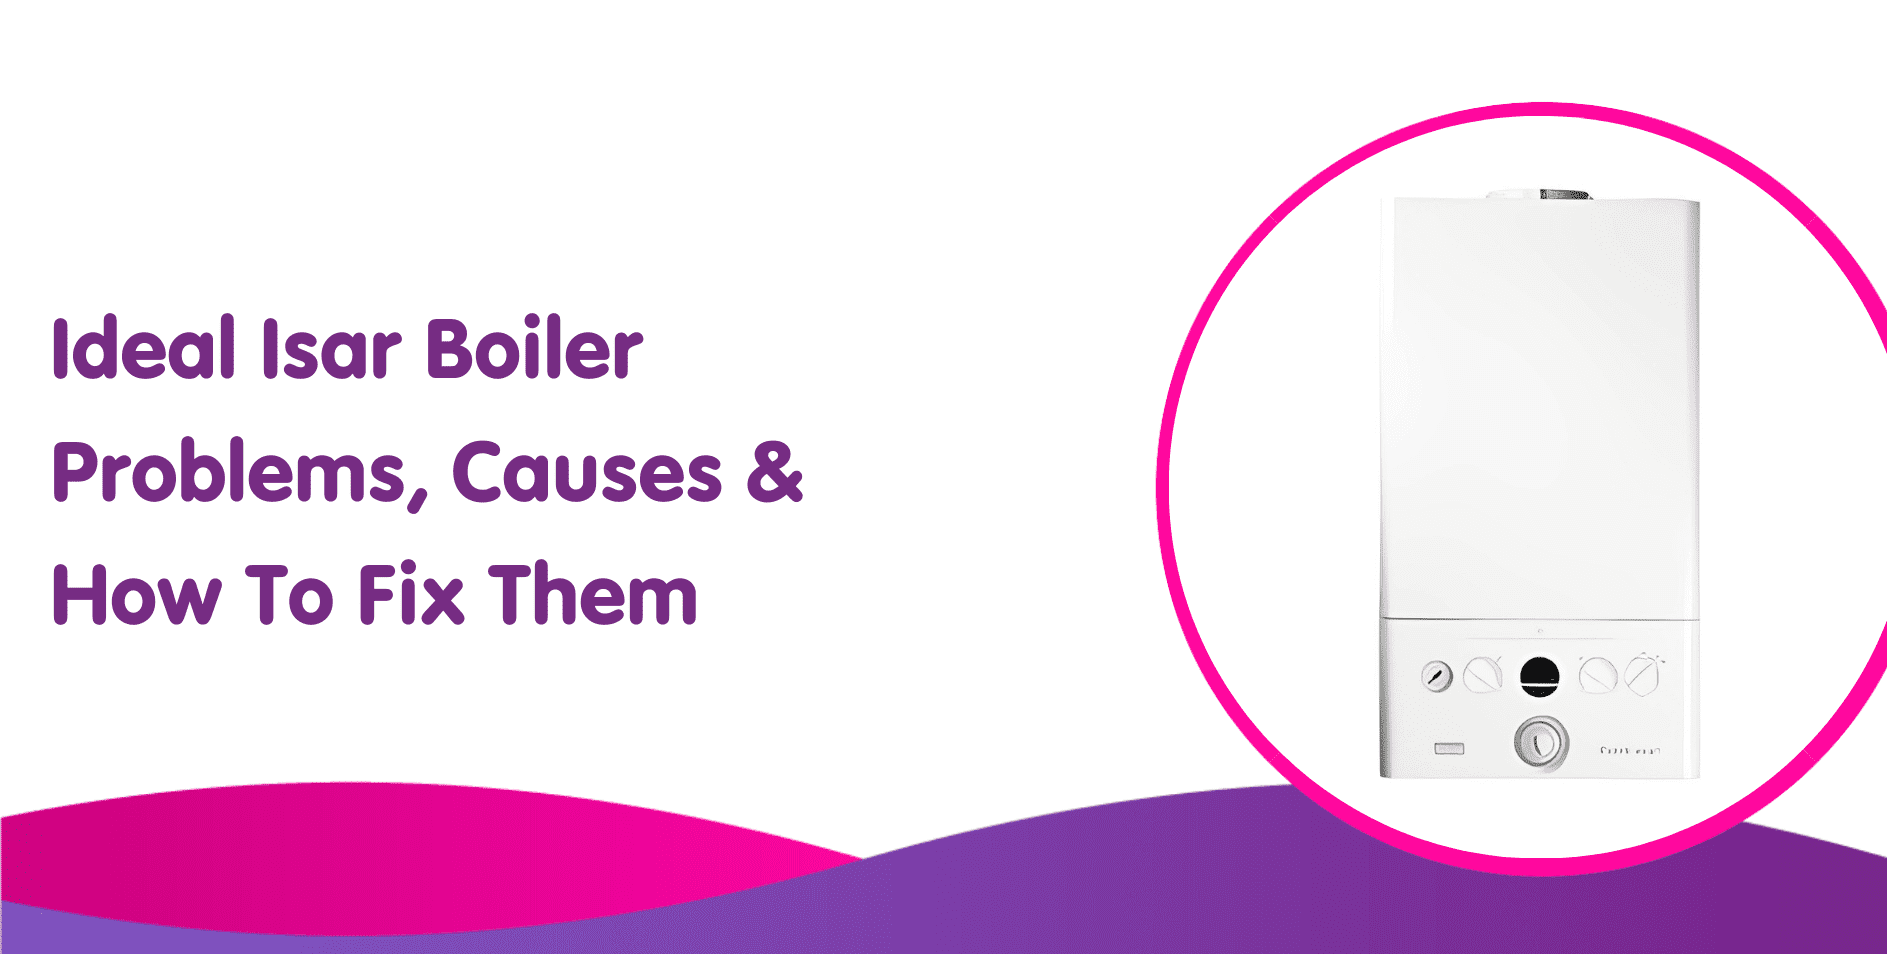 Ideal Isar Boiler Problems, Causes & How To Fix Them